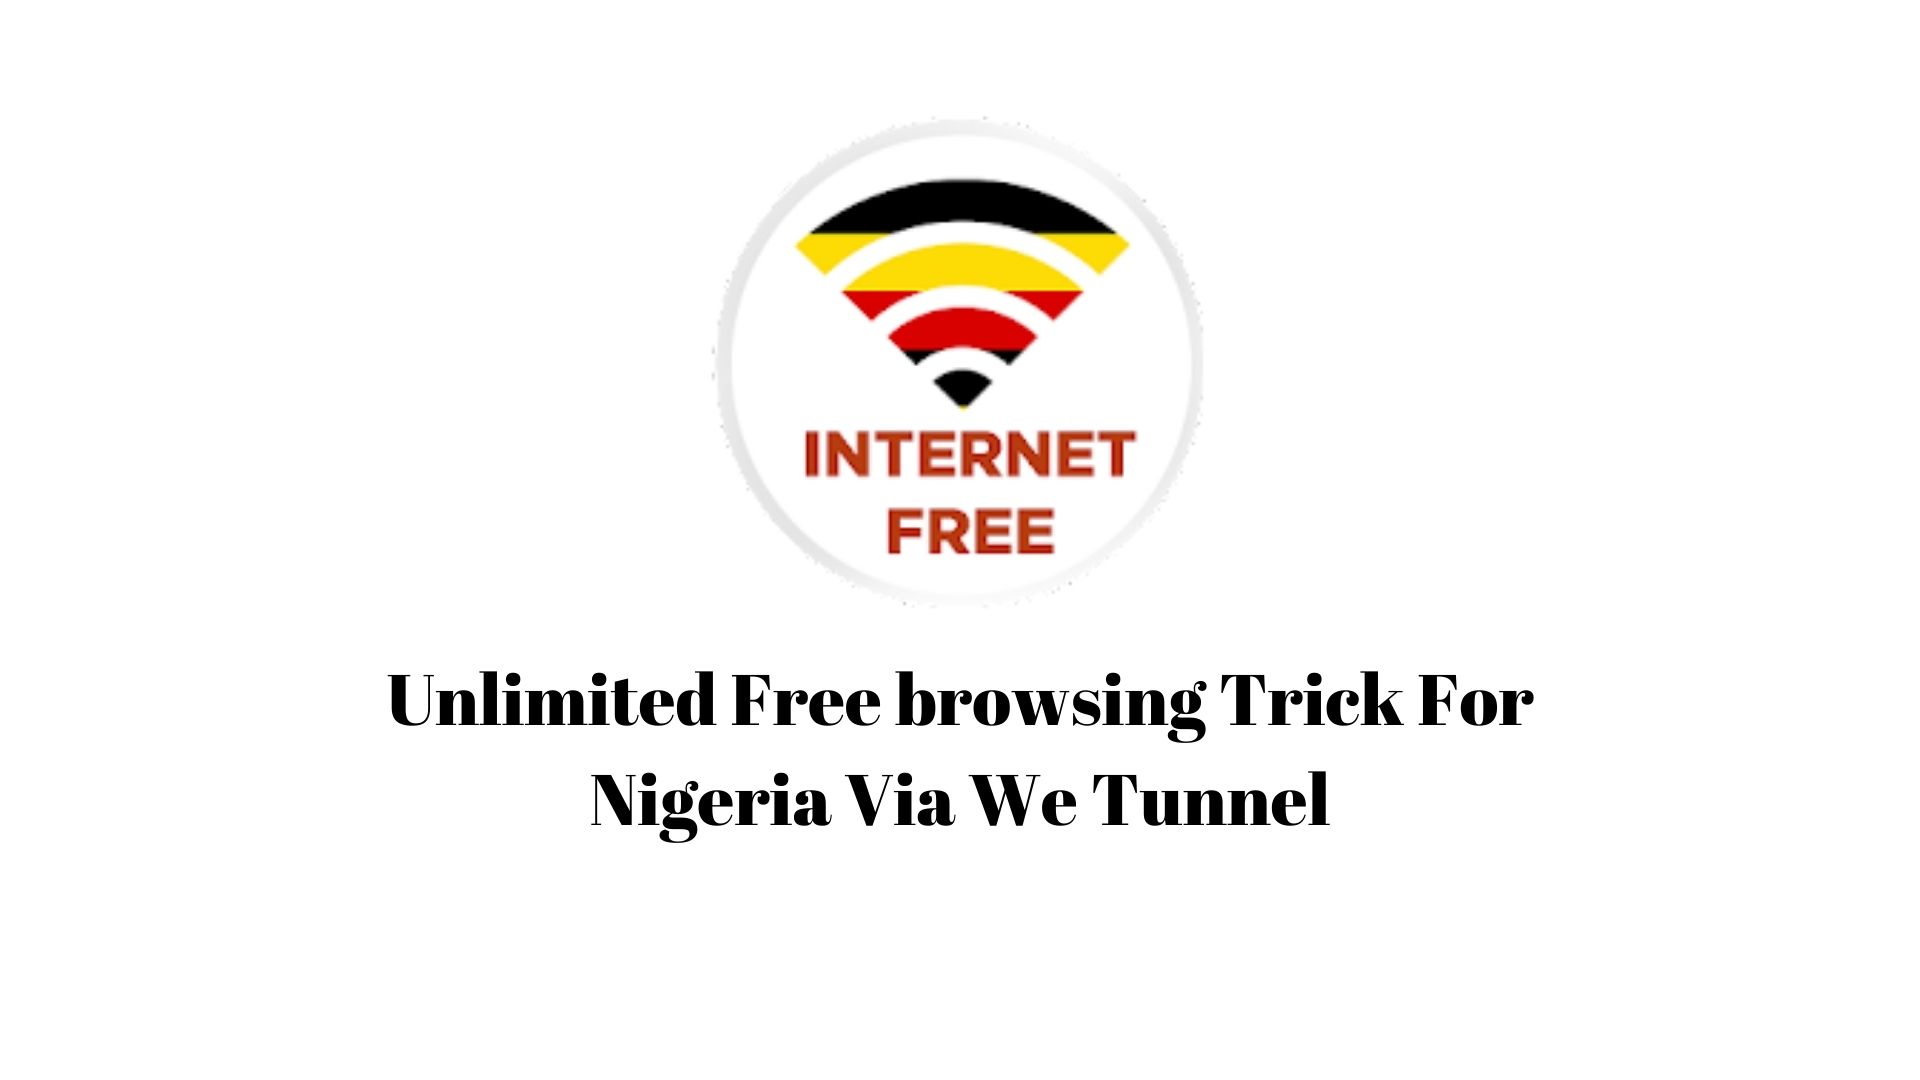 Unlimited Free browsing Trick For Nigeria Via We Tunnel